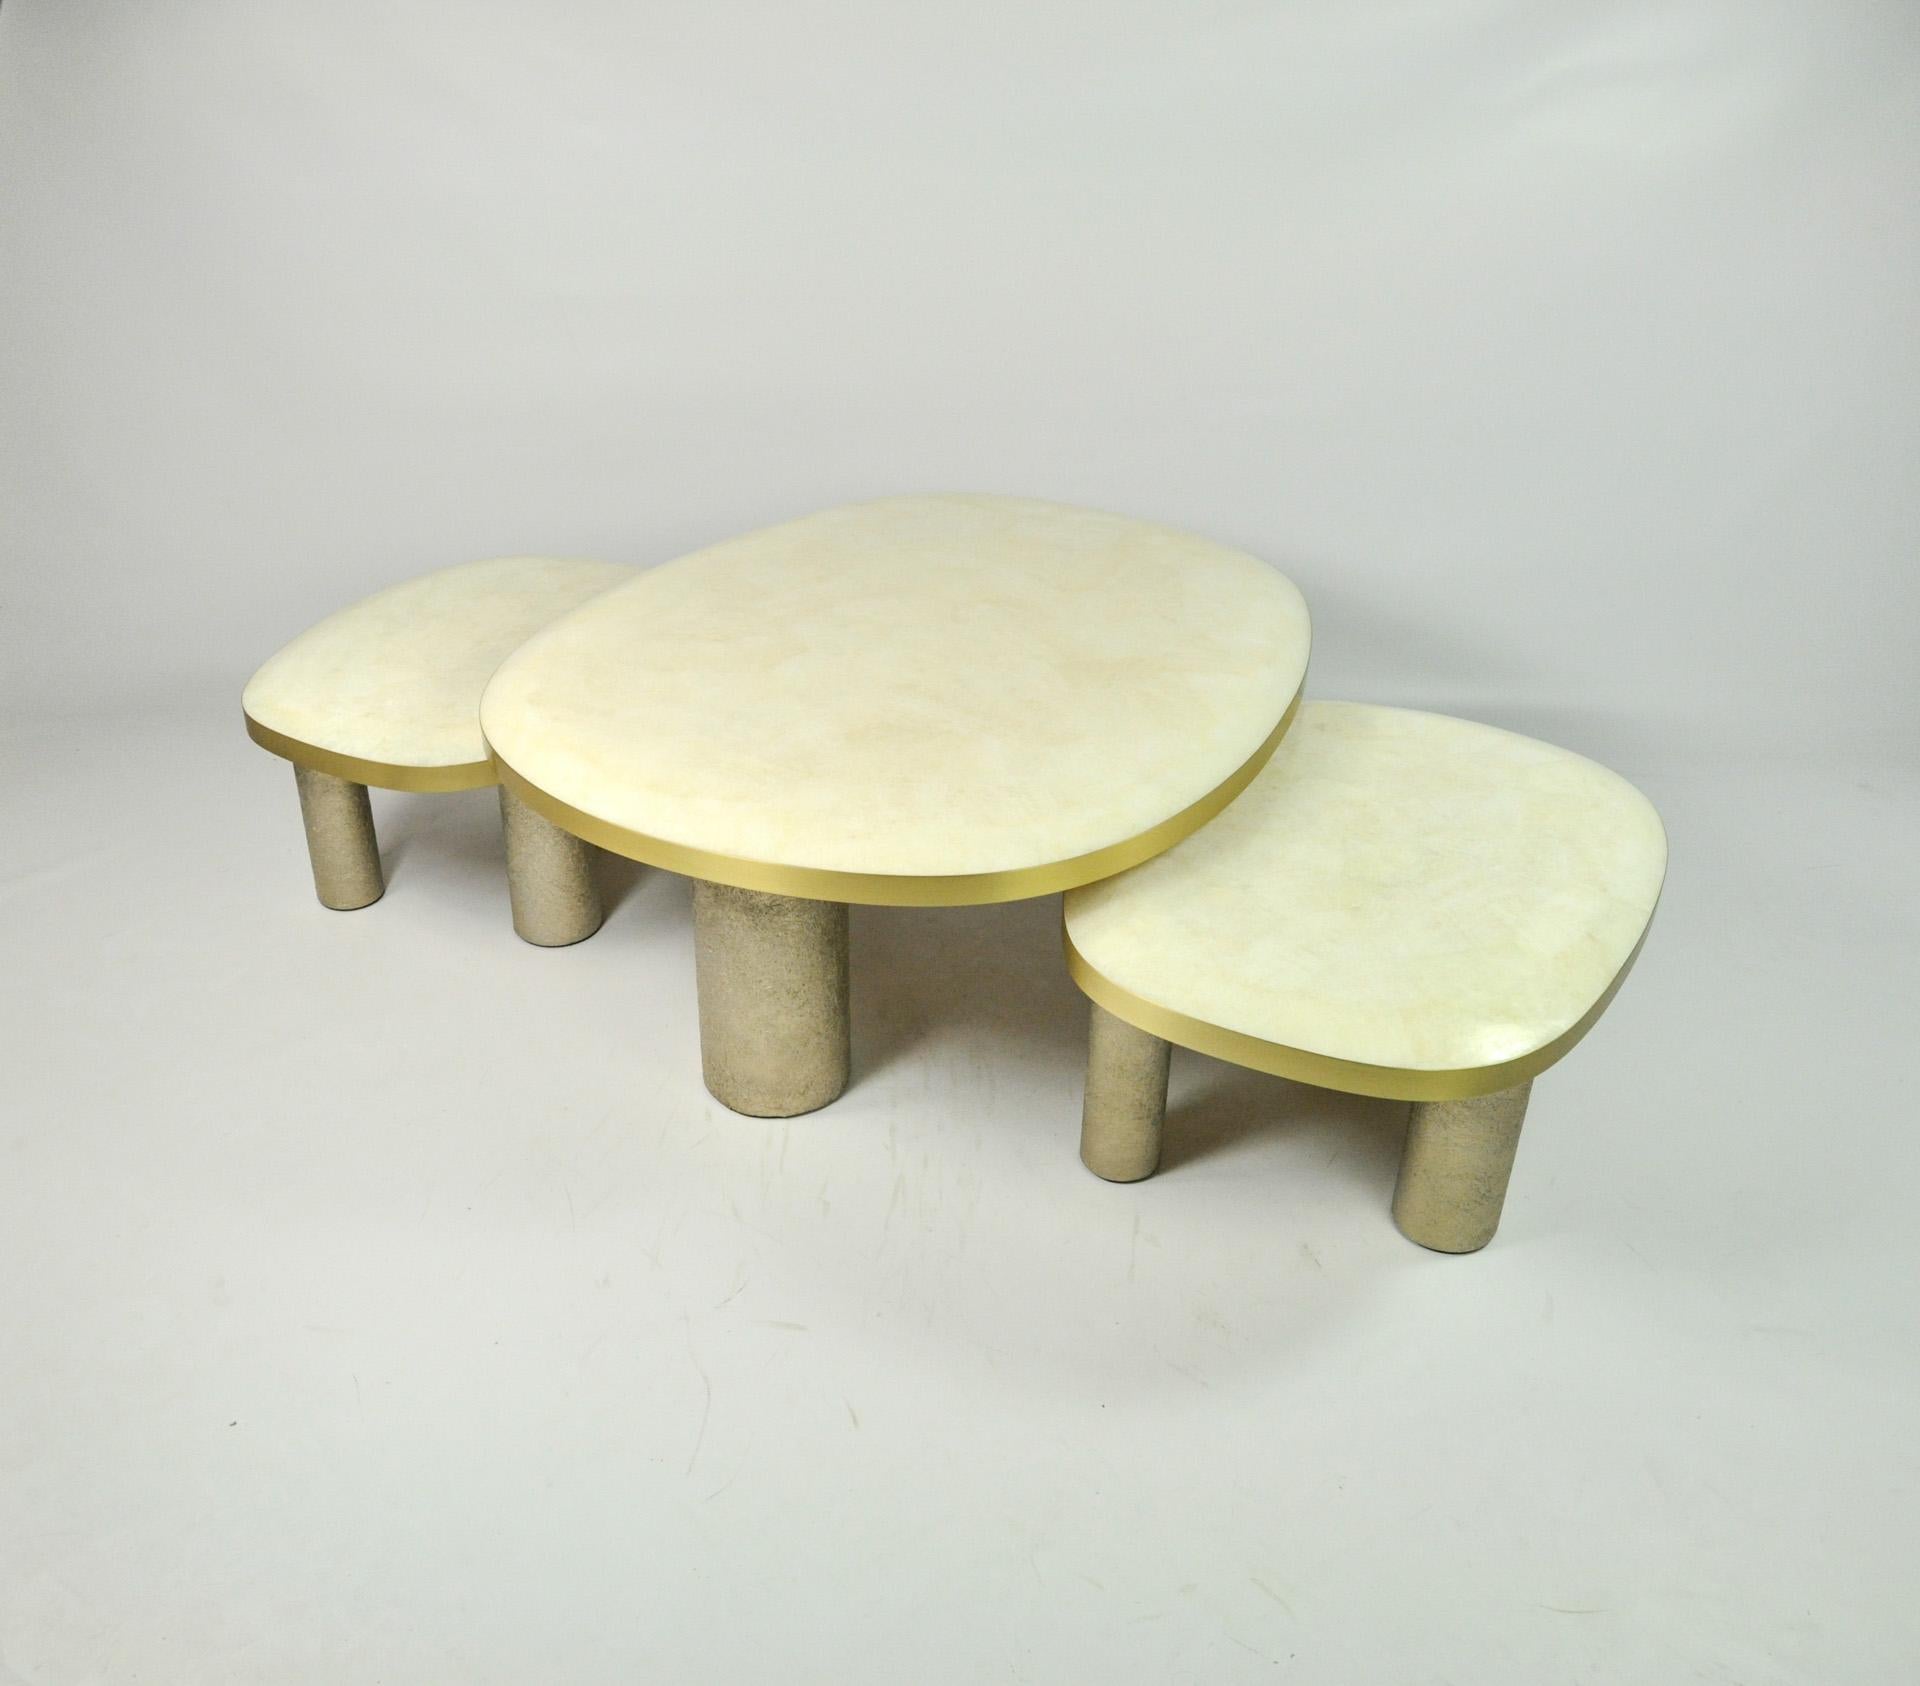 The set of 3 coffee tables Ovoid is made of a white rock crystal marquetry top.
The edges of the top are in brushed brass.
Each table has three cylinder legs made of semi raw glass fiber with a gilded patina.

The top of the tables is slightly